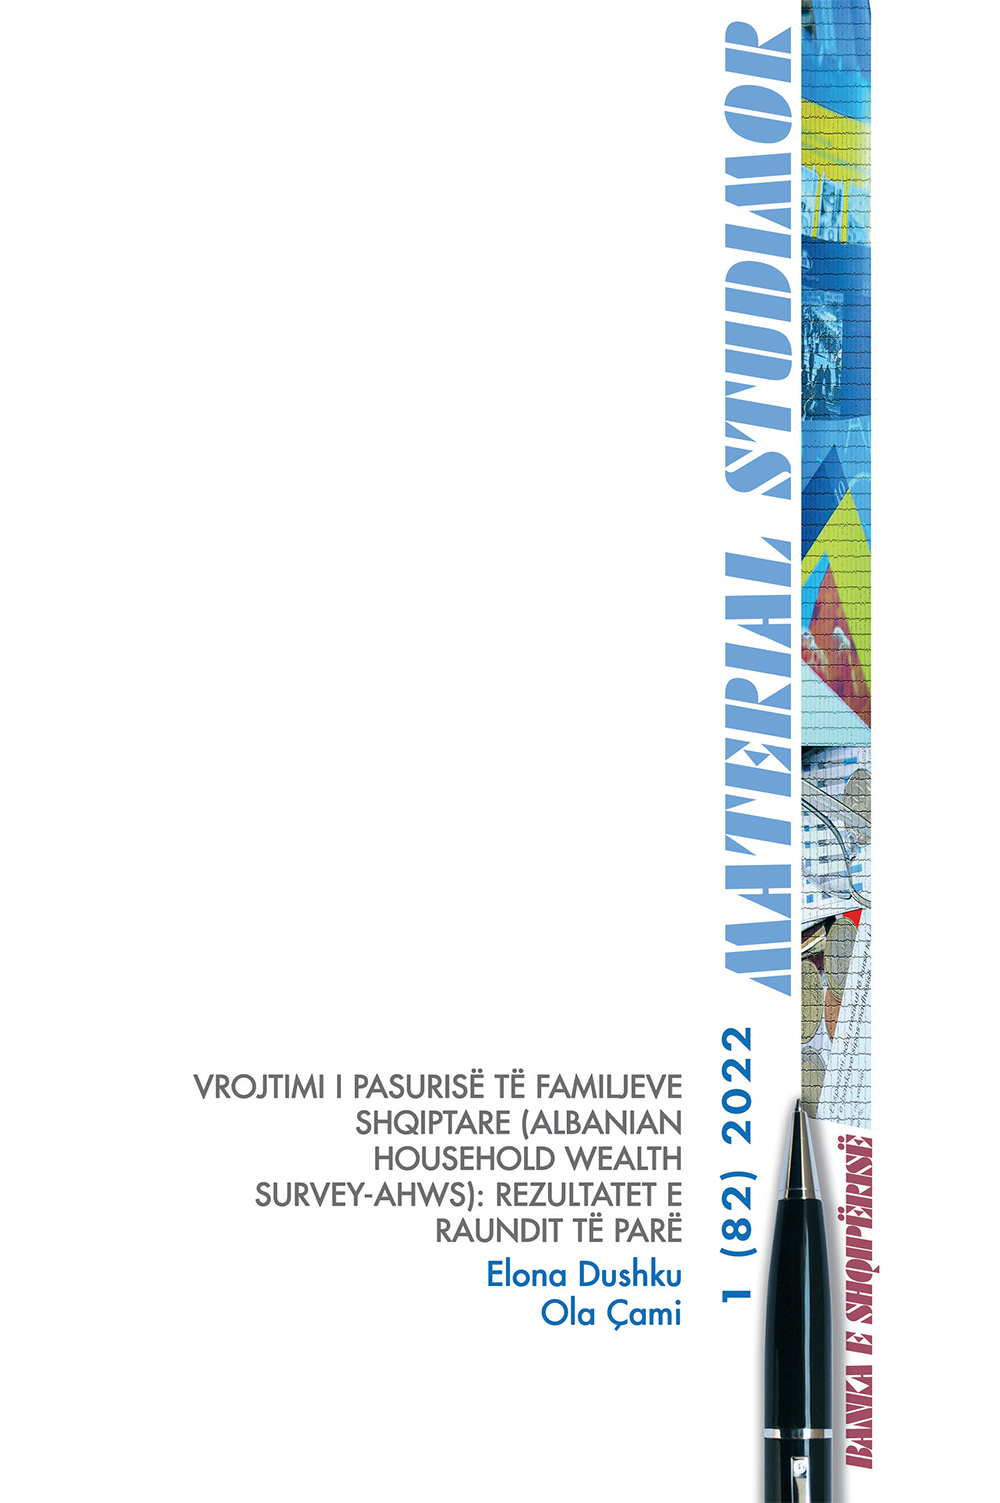 Albanian Household Wealth Survey-AHWS: Results from the first wave